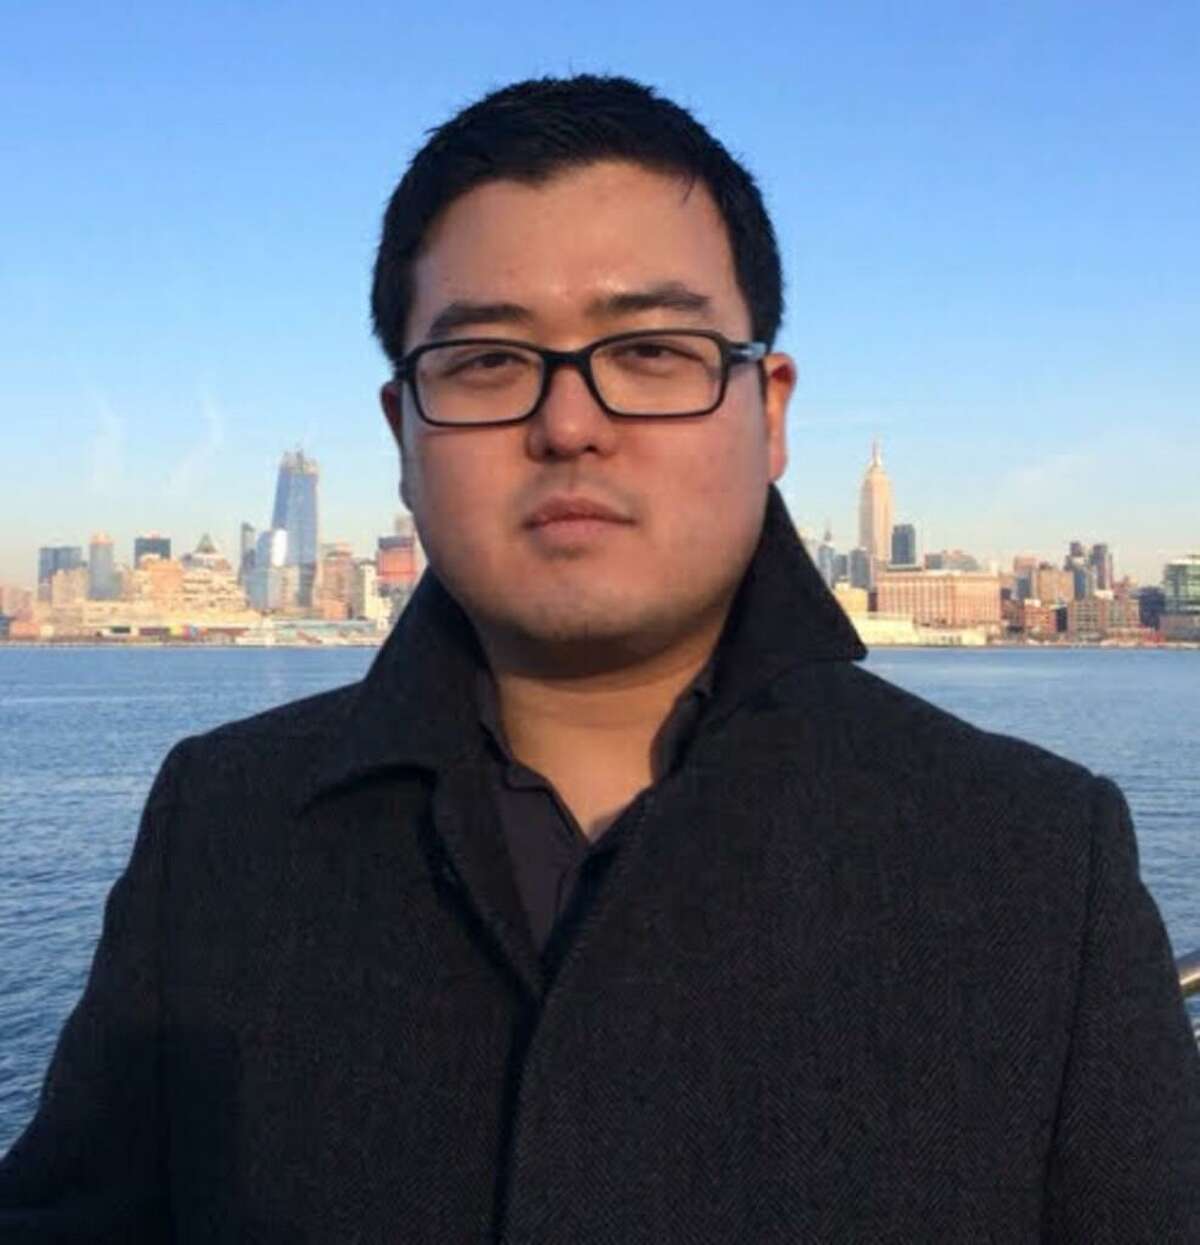 Jason Chung, B.C.L., LL.B. is executive director of Esports; assistant professor, Pompea College of Business, University of New Haven.